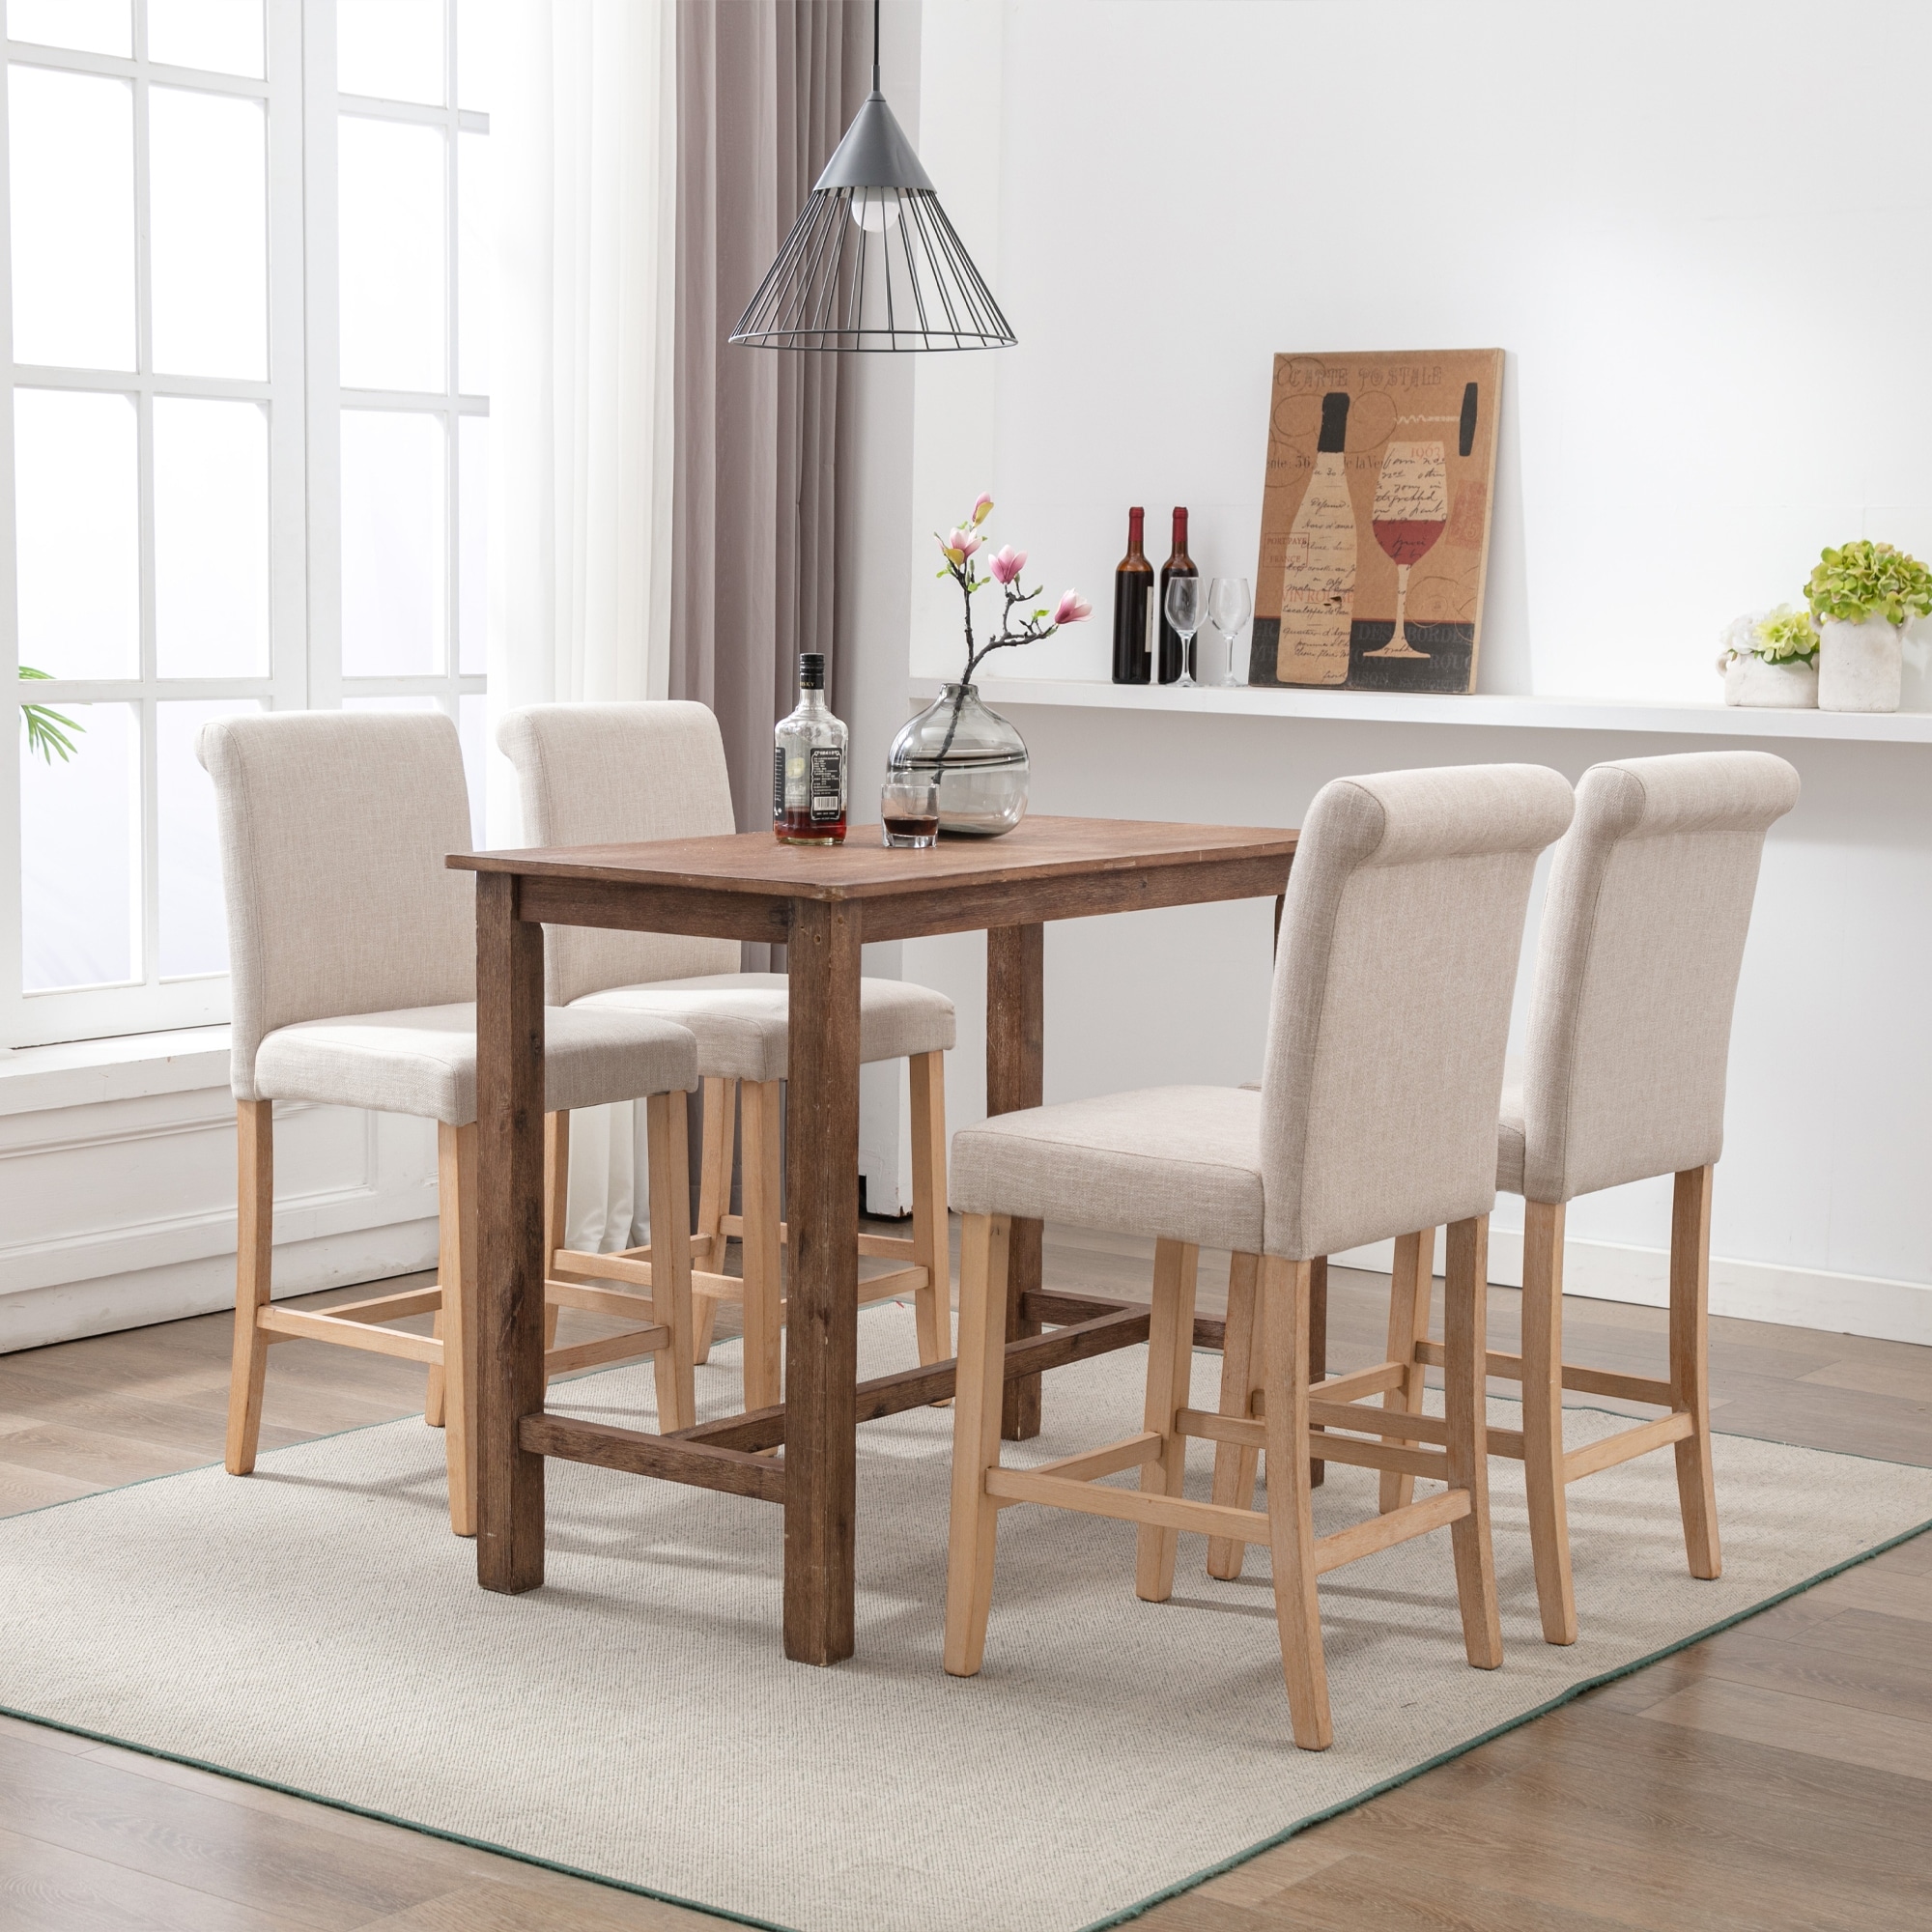 https://ak1.ostkcdn.com/images/products/is/images/direct/137d5194835d8d4f4d712b9b317a7a9787ba428b/Soft-Seating-Set-of-2-Beige-Thick-Foam-Padding-Bar-Stools-Cushions-with-Rubber-Wood-Legs-and-Stable-Base-Suitable-for-Bar.jpg